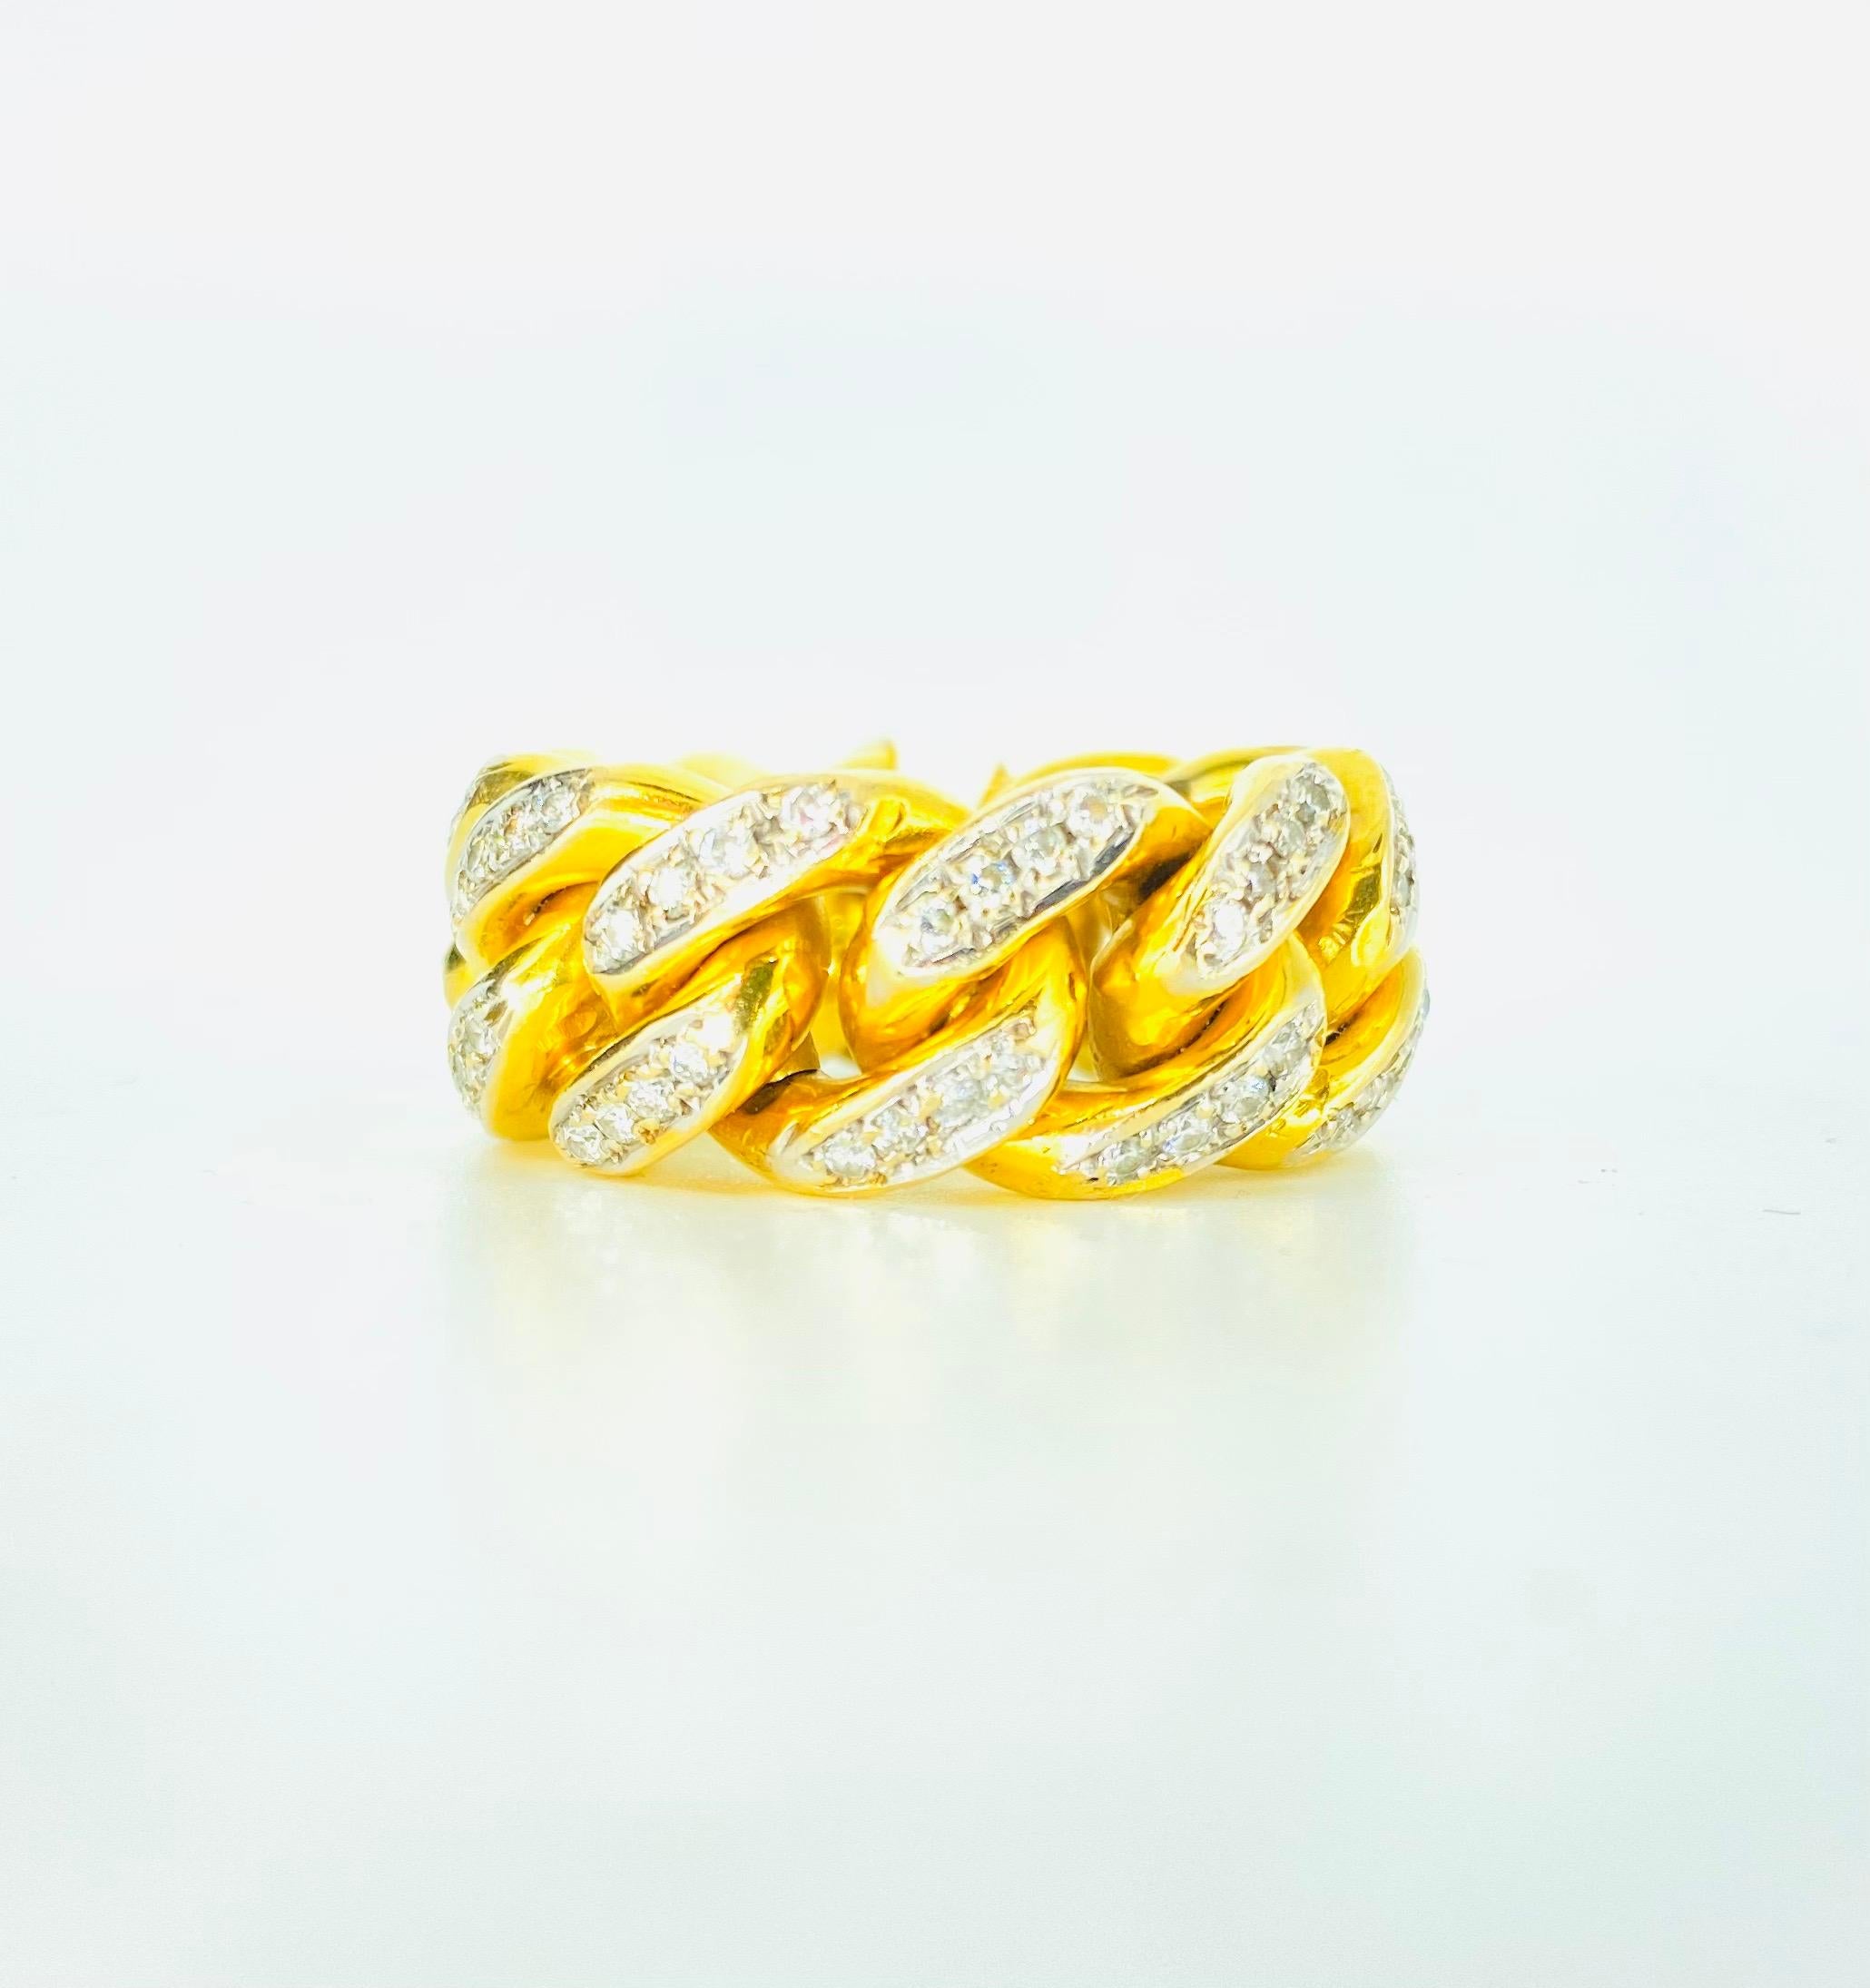 Men’s 3.00 Carat Diamonds Miami Cuban Link Ring 14k Gold. The ring is heavy and weights 35.5 grams solid gold 14k. The ring measures 11.75mm in width and is a size 9.5 (not resizeable). Hand made ring and very strong with approx 3.00 carat of white